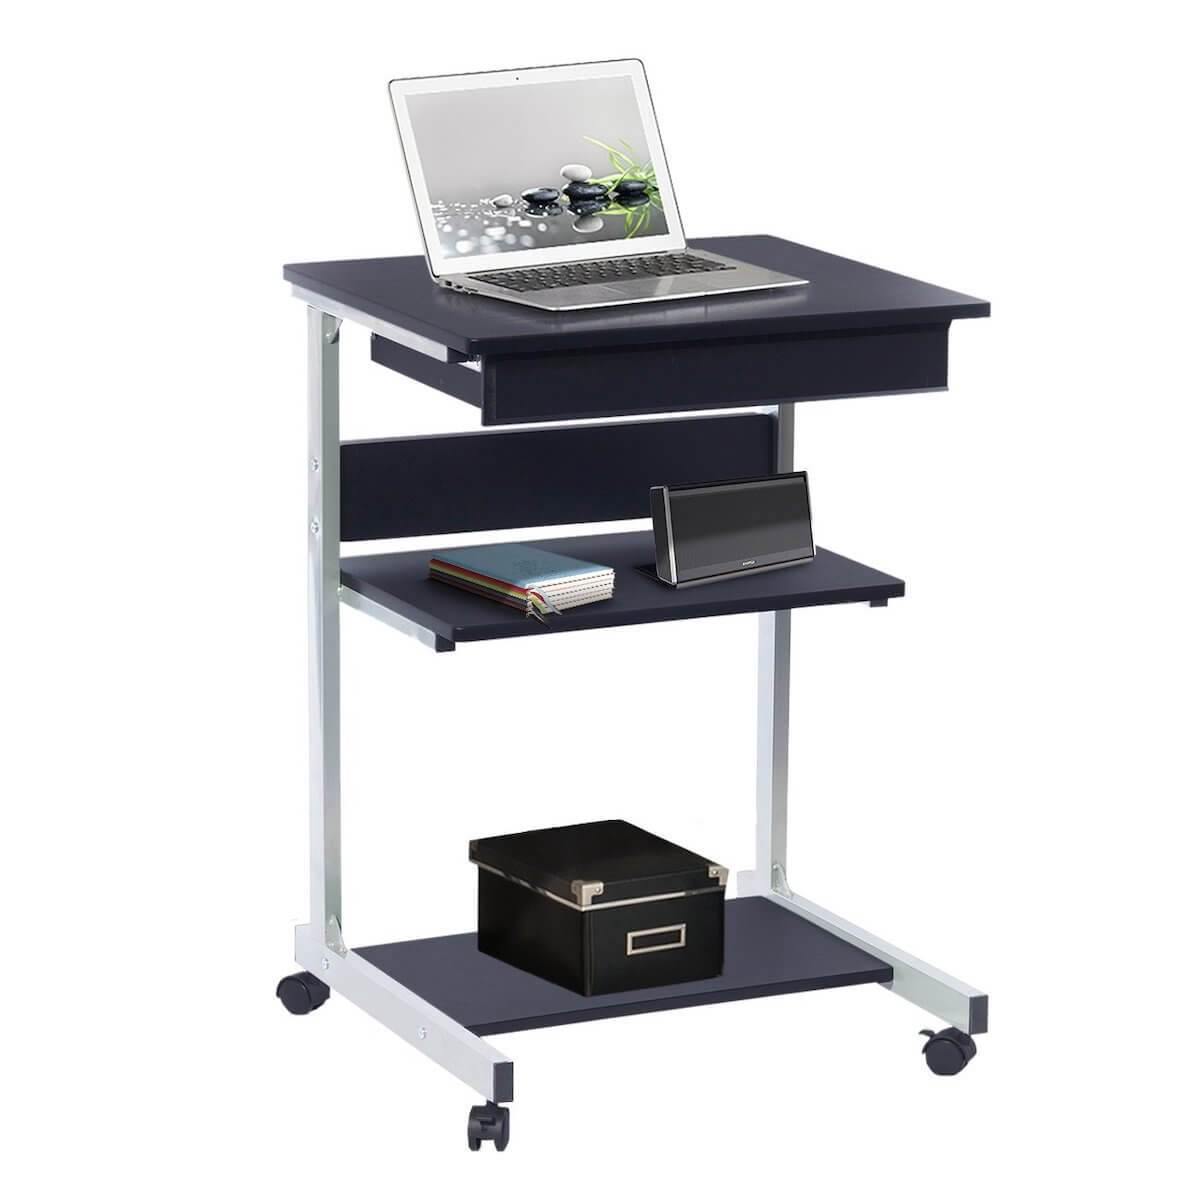 Techni Mobili Graphite Rolling Laptop Cart with Storage RTA-B018-GPH06 with Computer